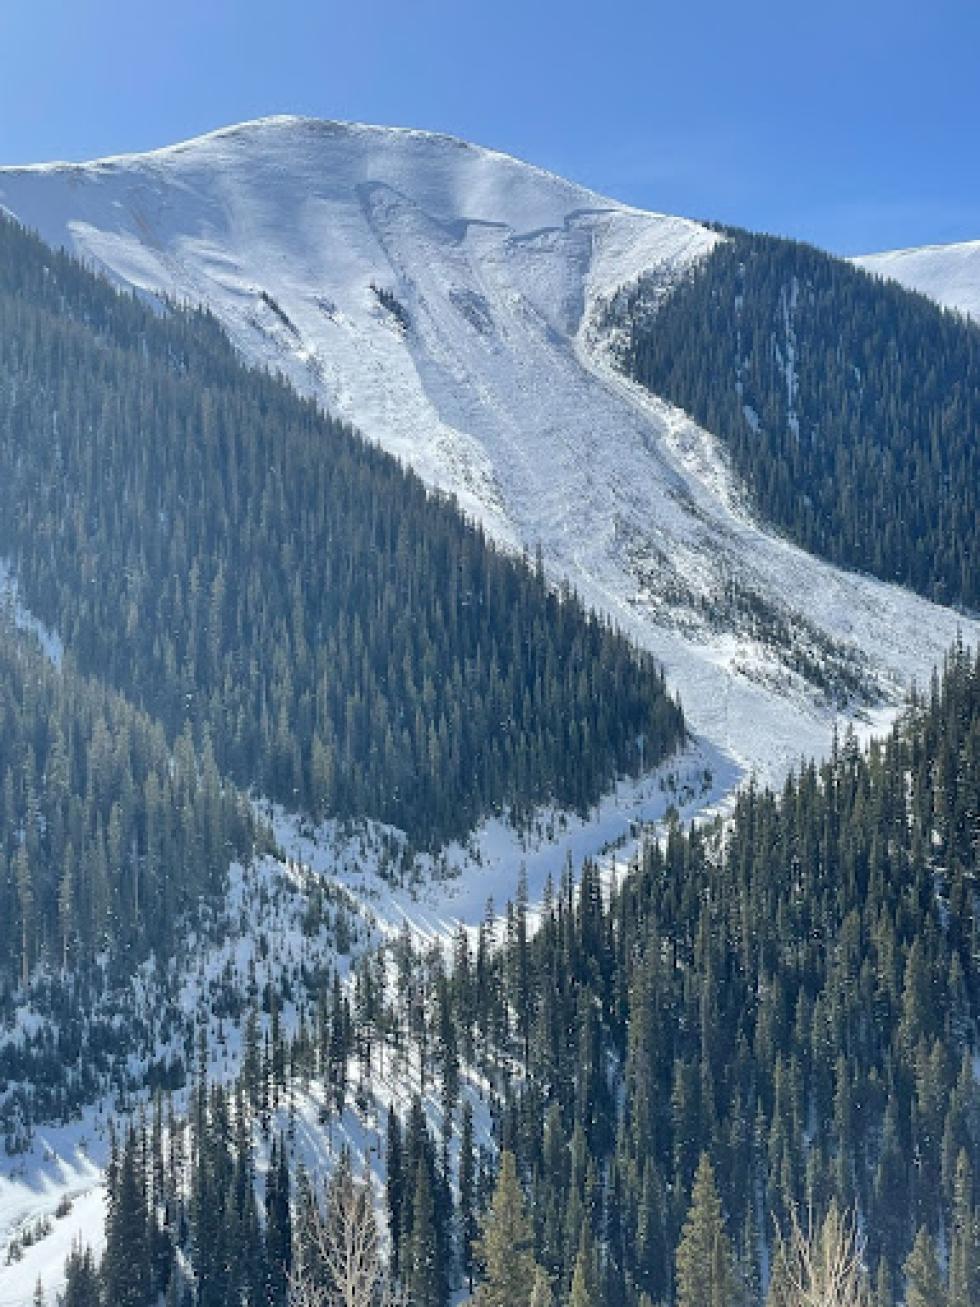 A very large avalanche triggered with explosives in the San Juan Mountains near Silverton.